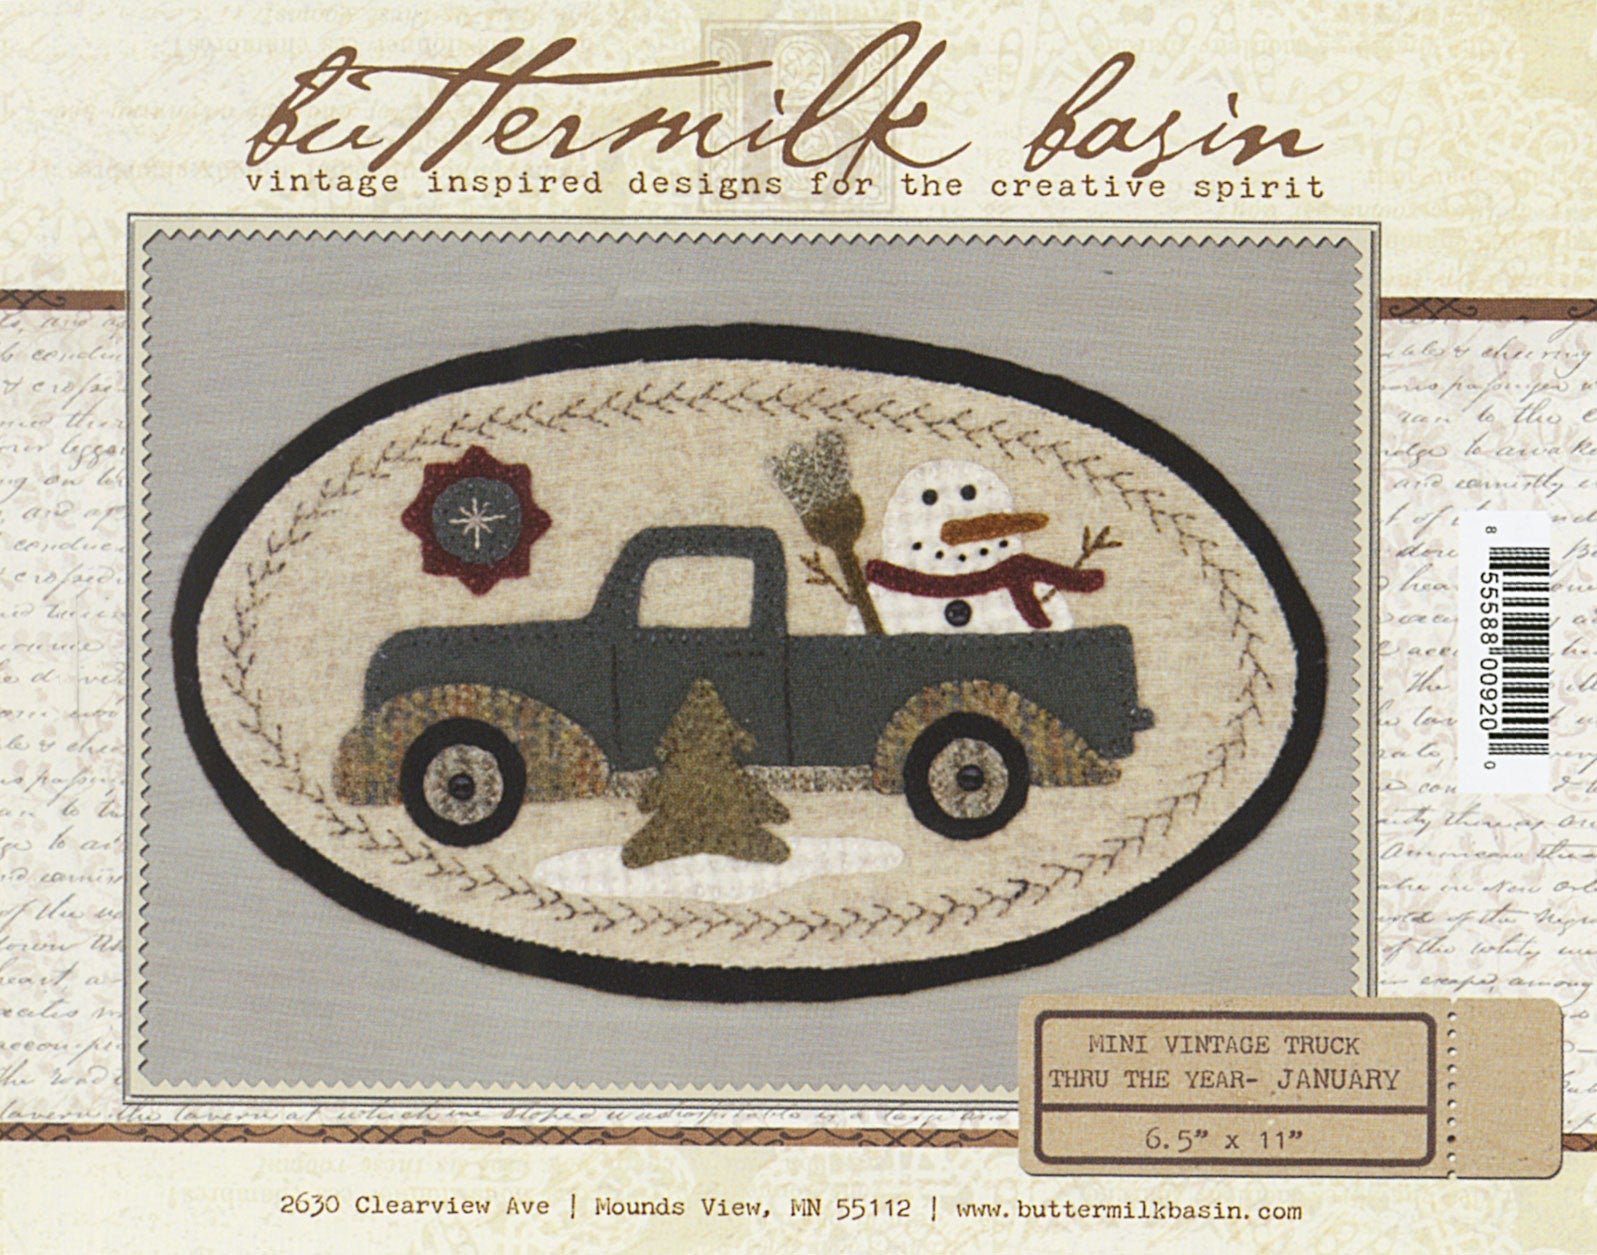 Mini Vintage Truck Thru The Year January Applique Pattern by Buttermilk Basin